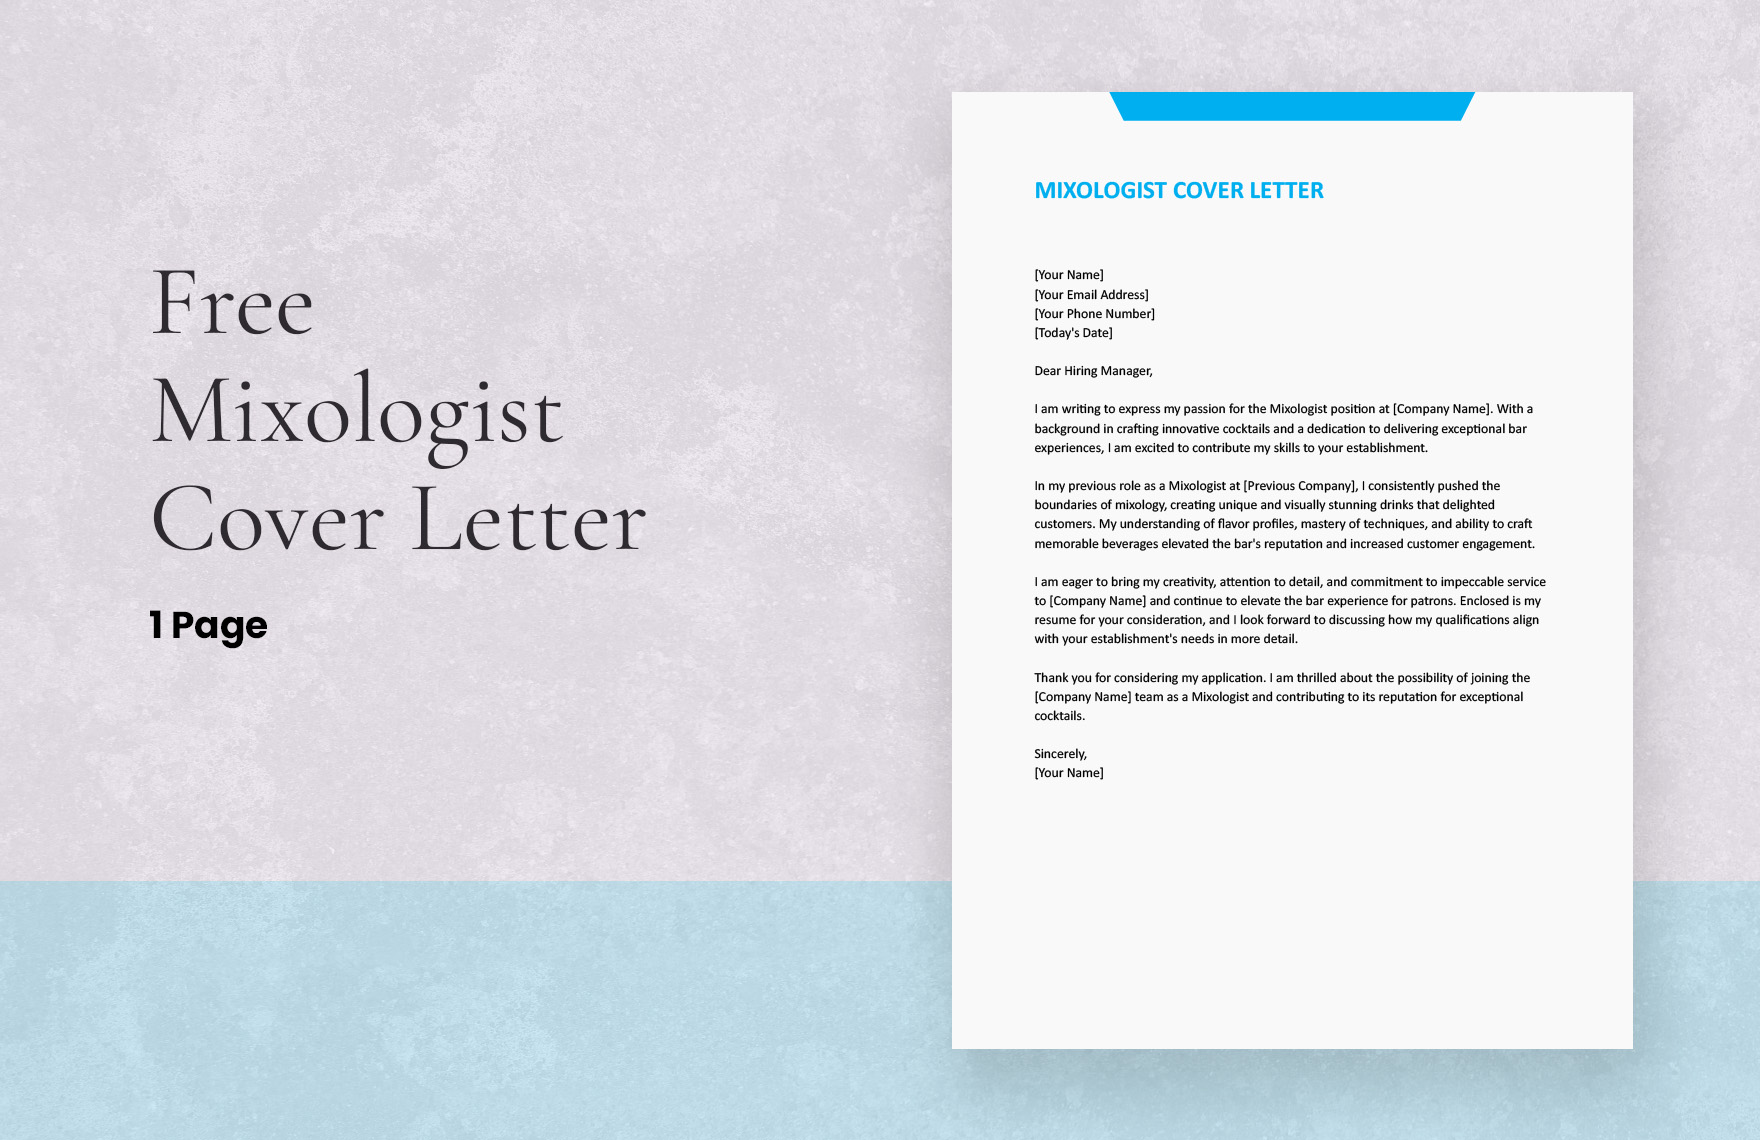 Mixologist Cover Letter